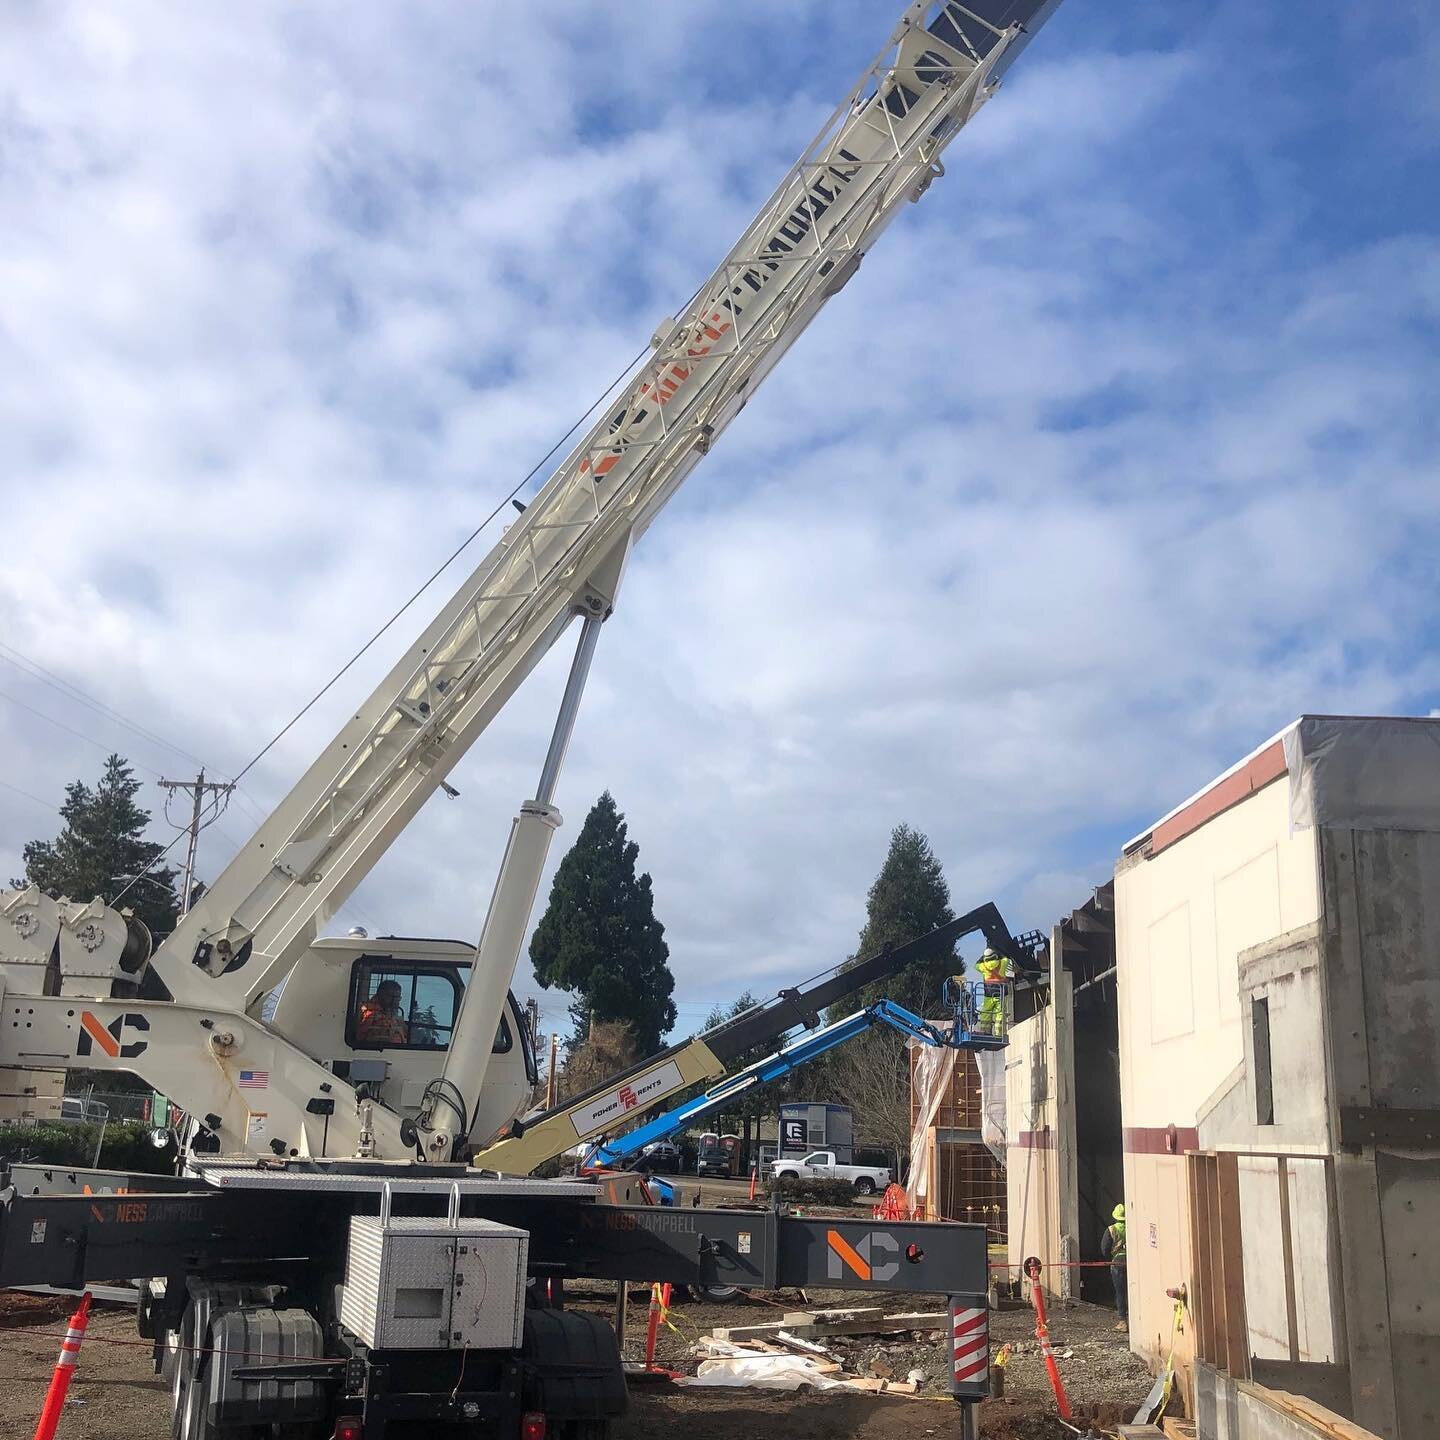 Oregon City Operations Complex, structural steel install, as well as shoring and bracing of existing building. Thank you George for the pictures. We love seeing the great work everyone is doing out there. #Emerick #EmerickConstruction @scottedwardsar